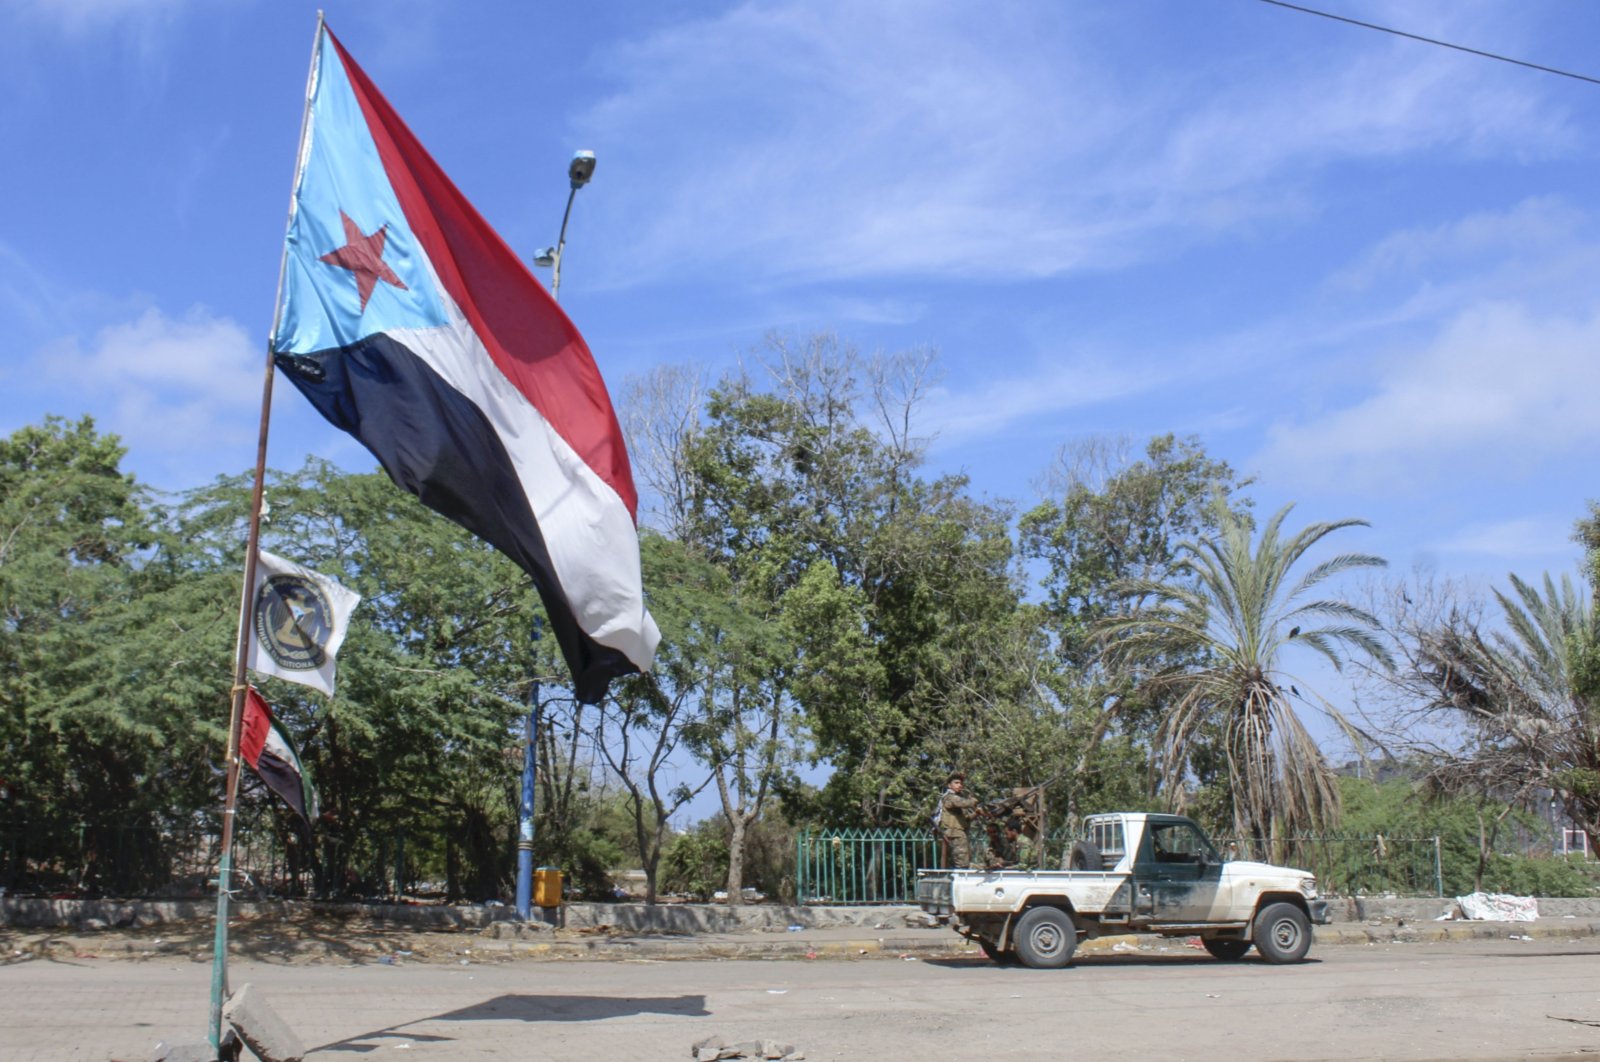 Fighters with Yemen's Southern Transitional Council (STC) drive a vehicle past a separatist flag (the old flag of South Yemen) as they deploy in the southern city of Aden, April 26, 2020. (AFP Photo)